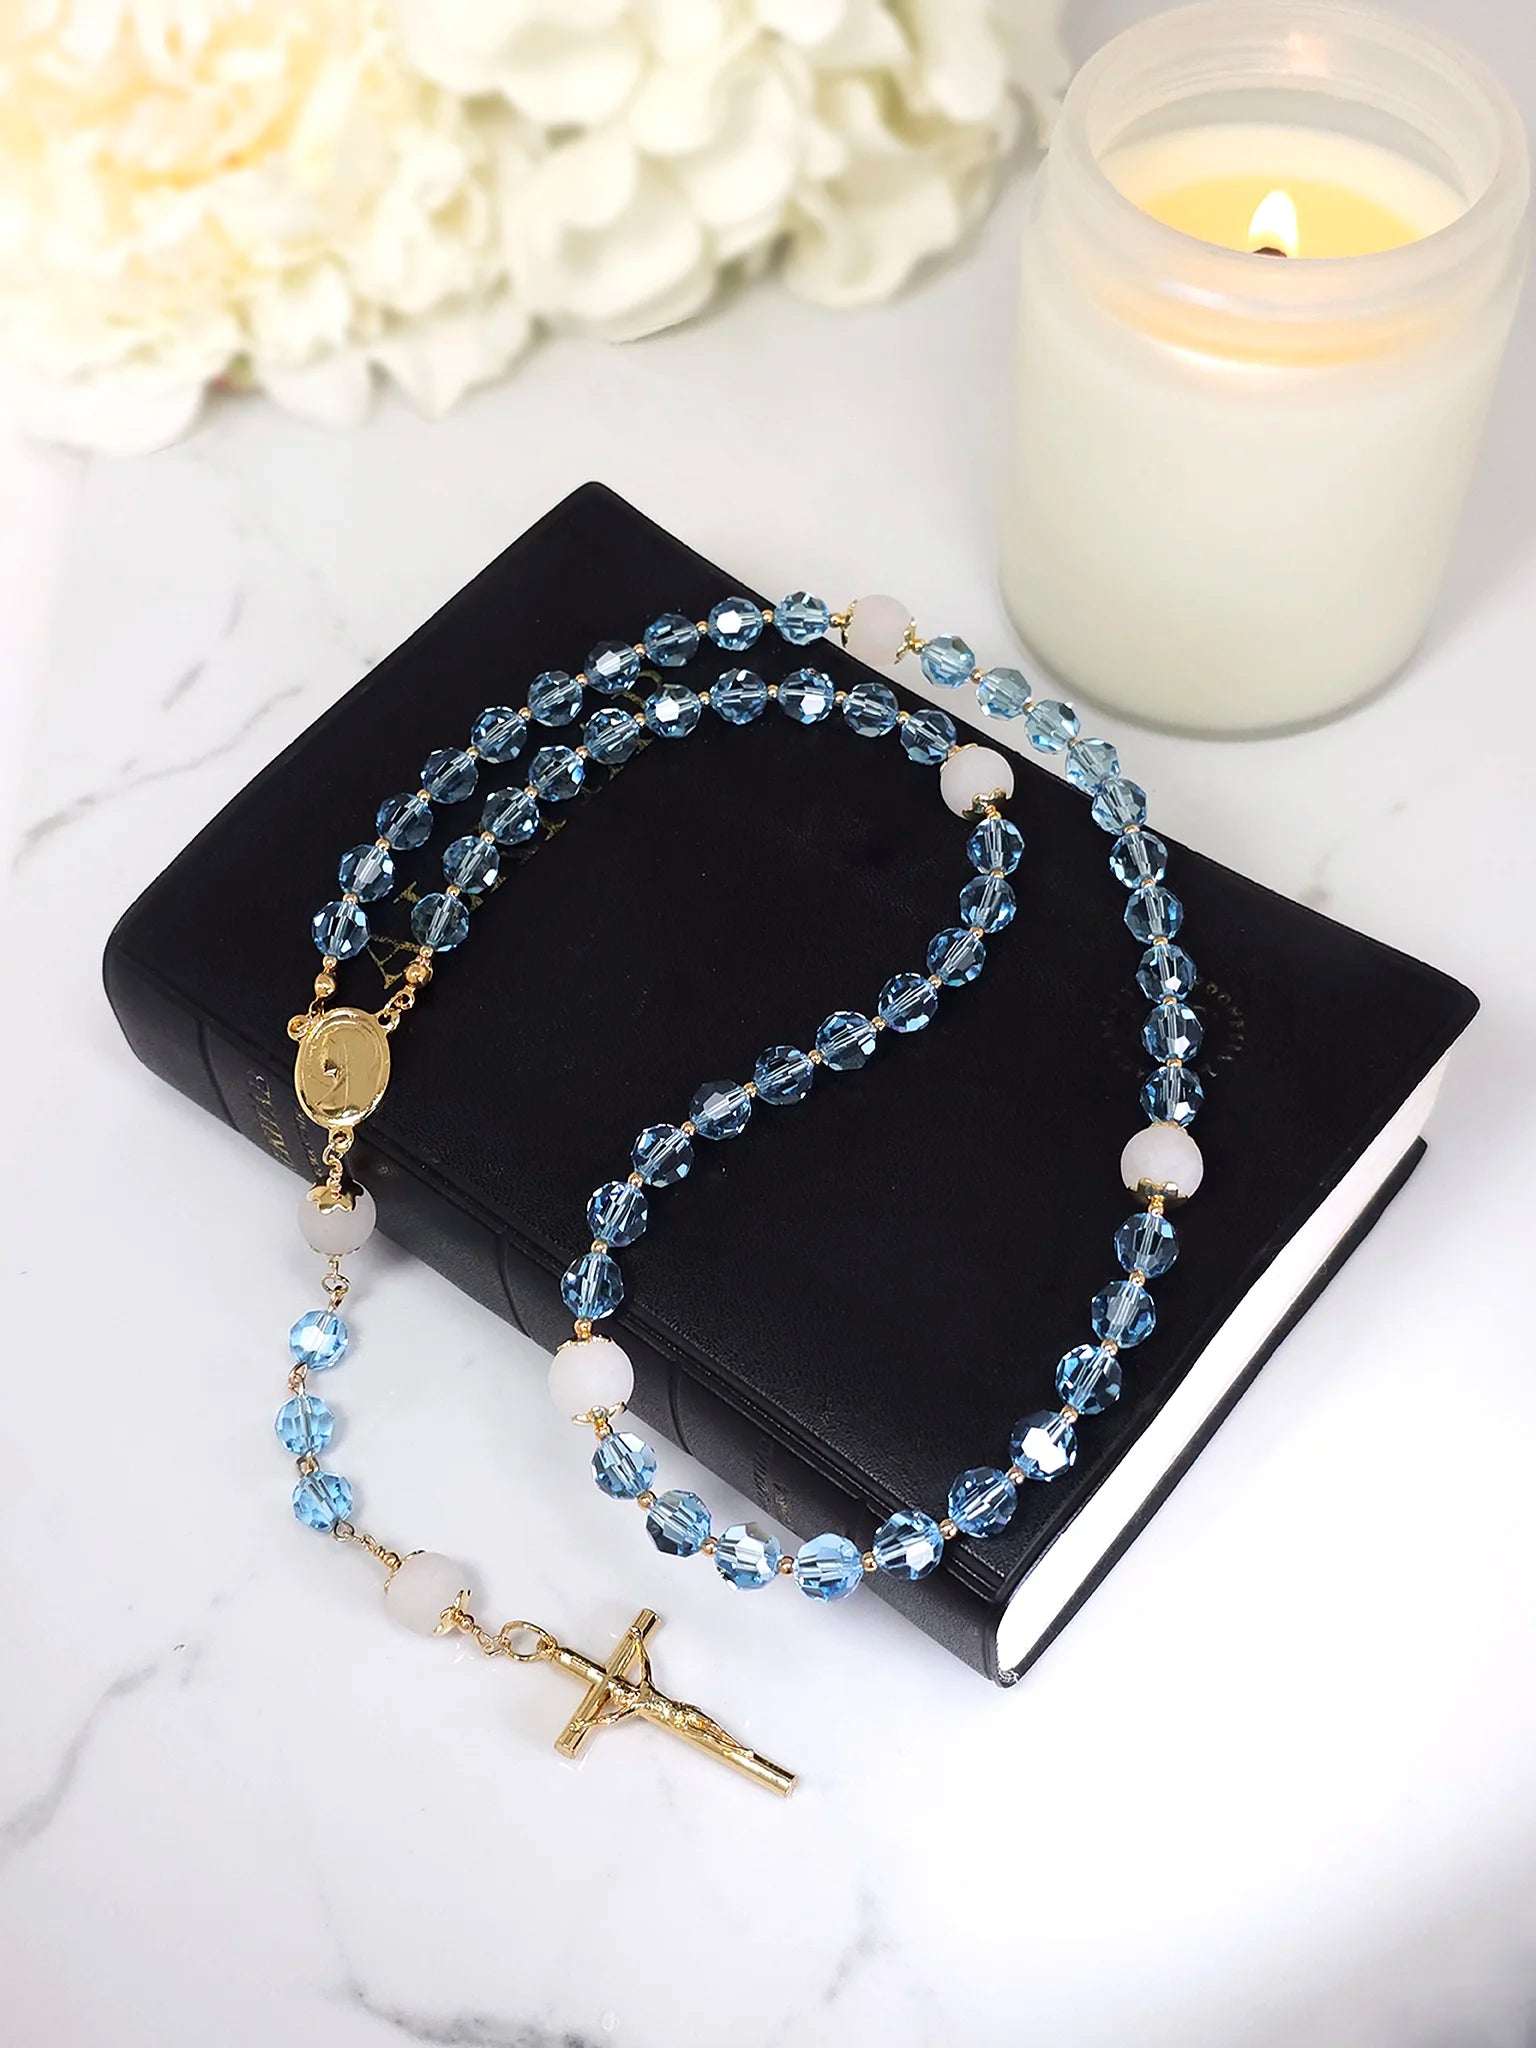 Aquamarine Austrian Crystal Rosary Necklace with genuine blue Swarovski beads and a gold-plated Madonna centerpiece.